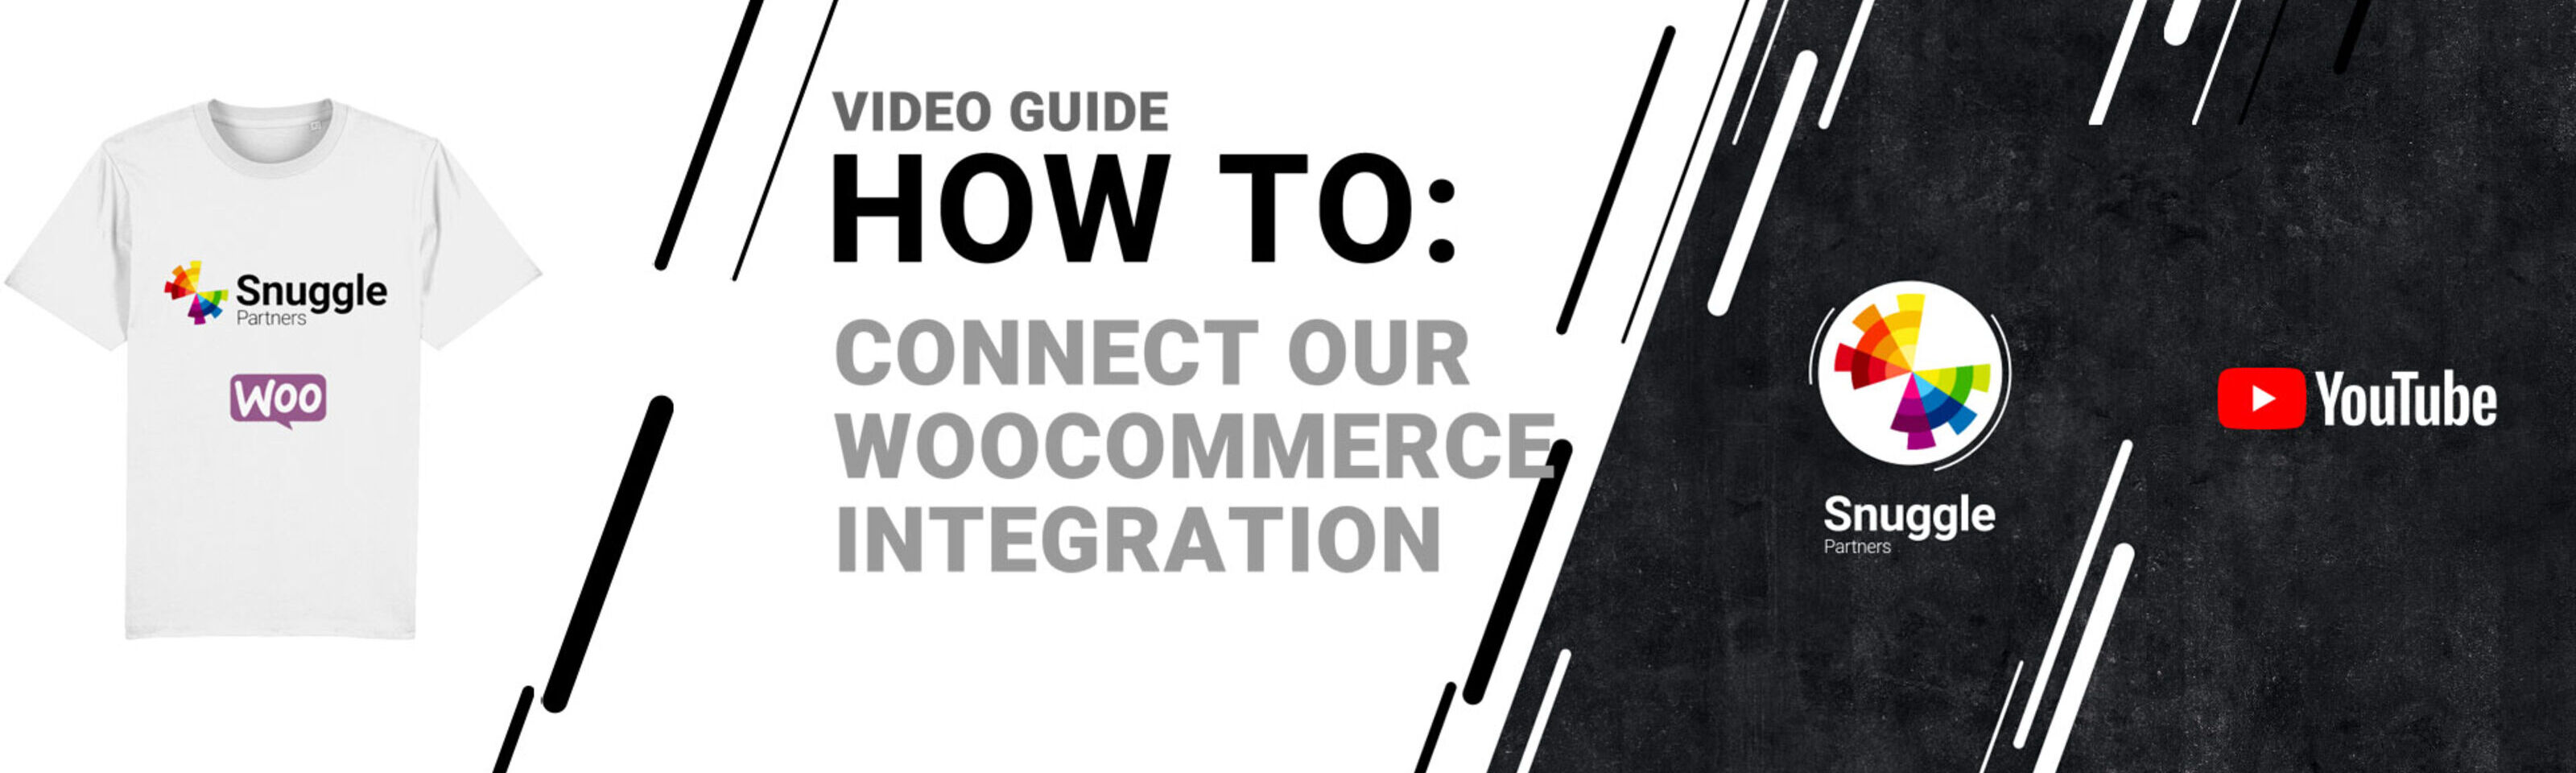 HOW TO: Connect Our WooCommerce Integration